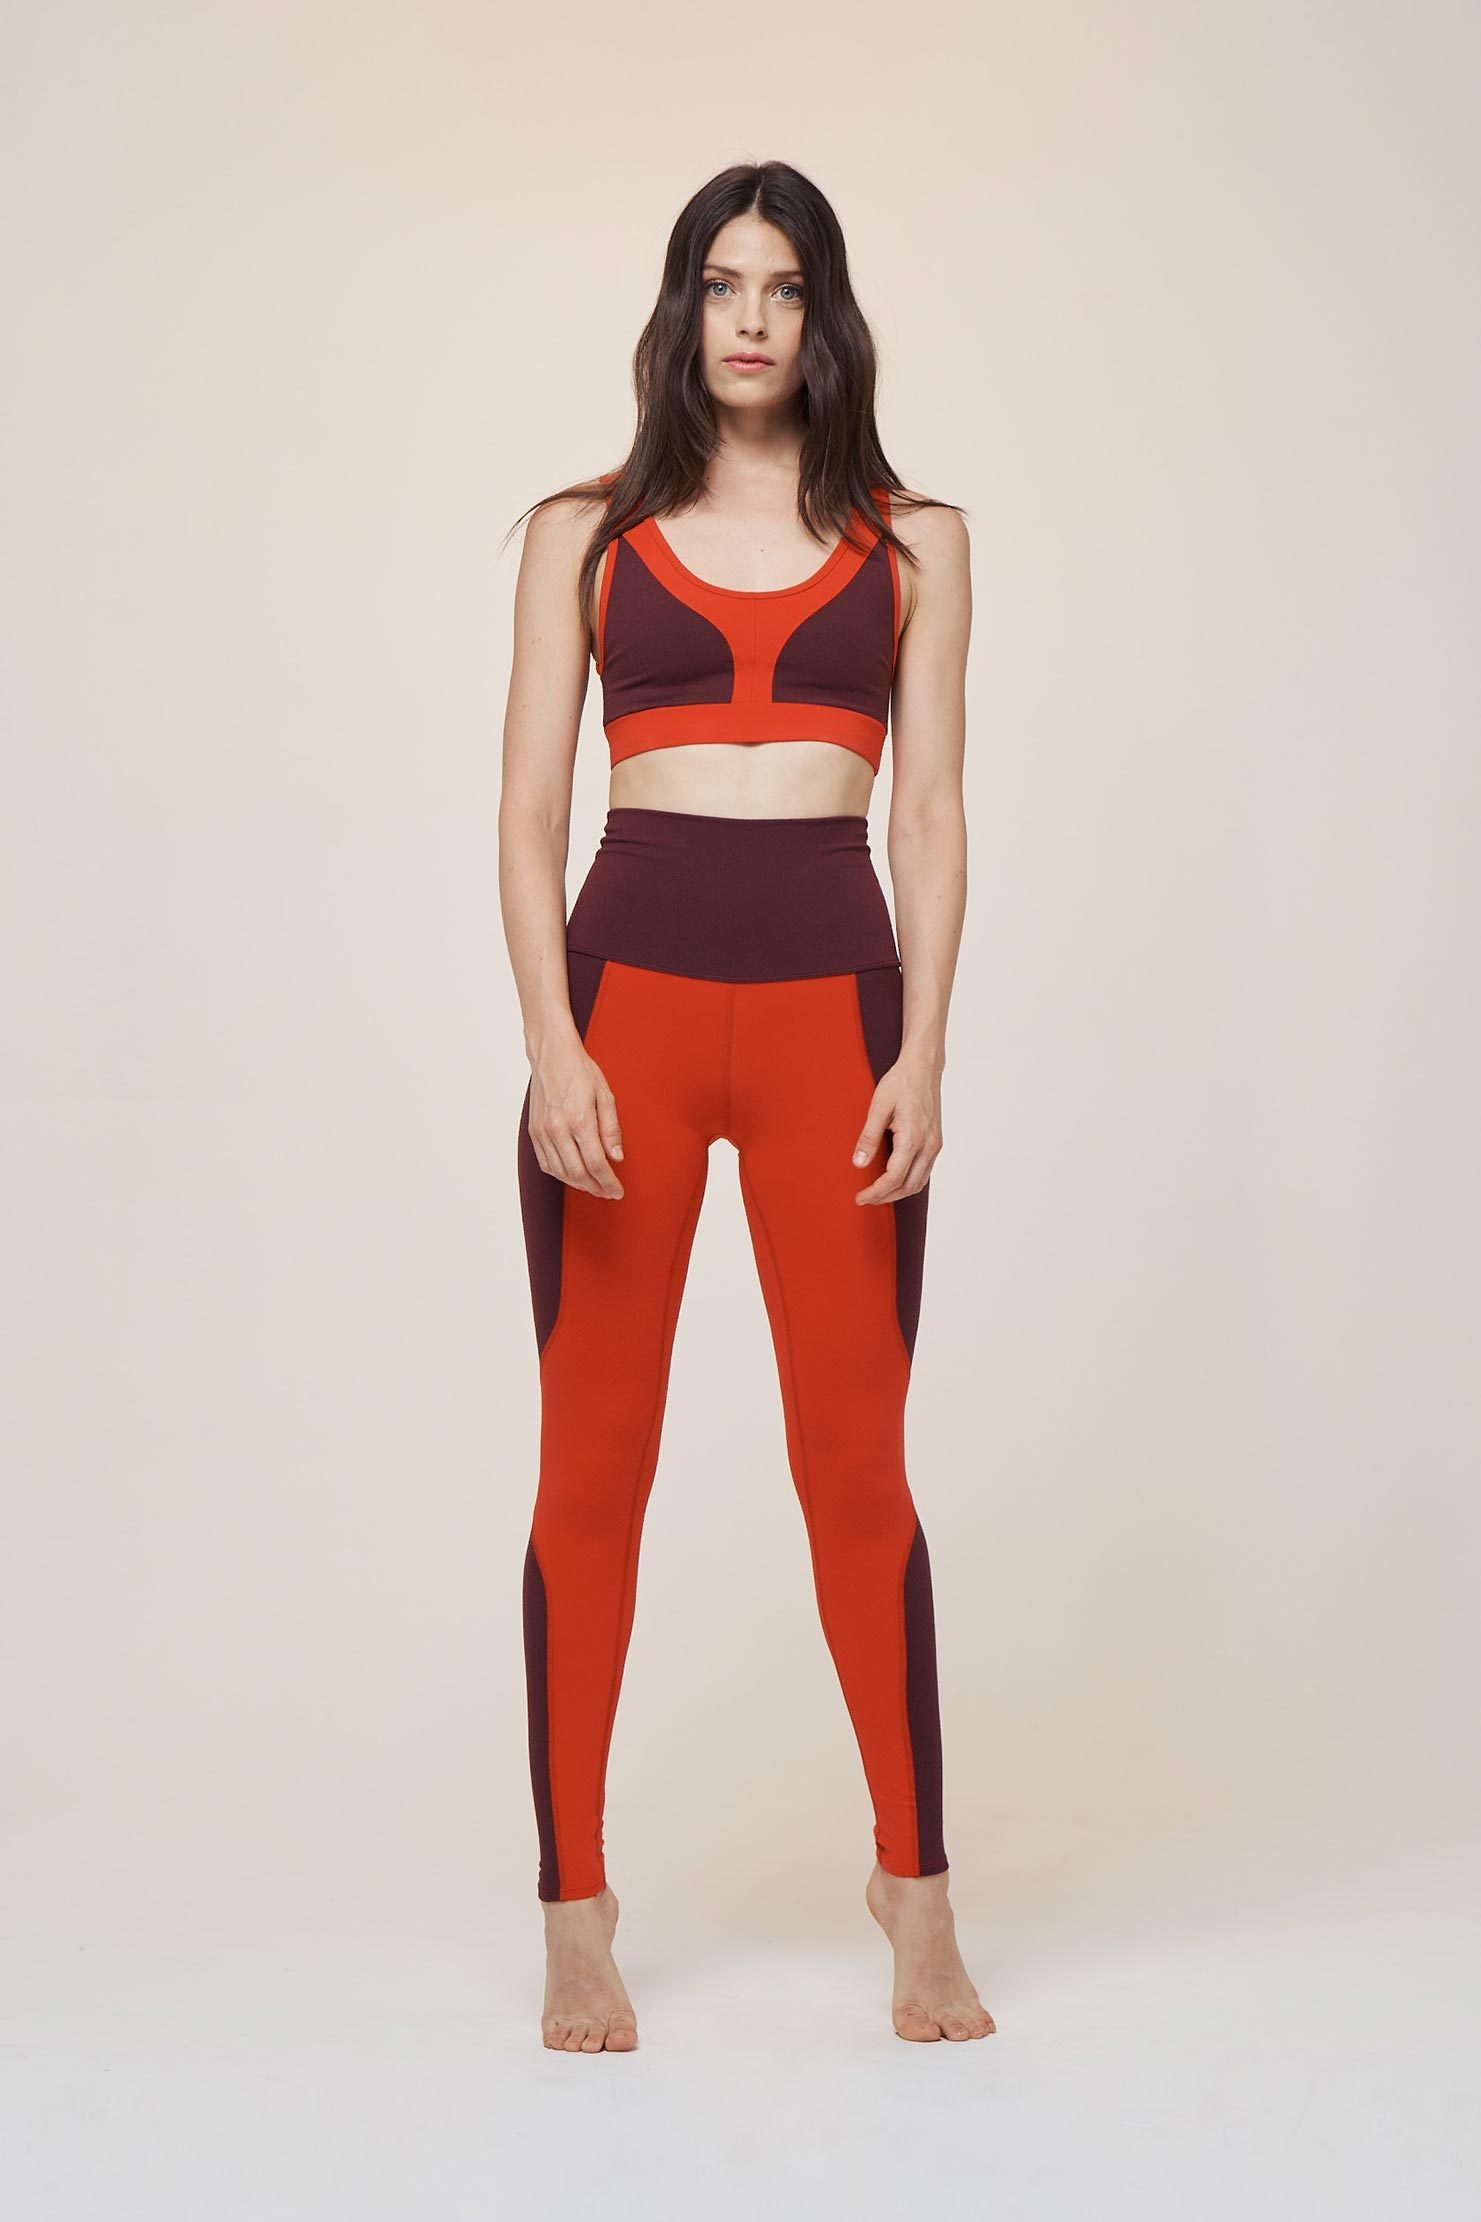 Cult athleisure brands we want to shop right now: LIVE THE PROCESS Geometric legging, $148 USD (approx. $210 NZD) Under a waistband that can be worn high or folded low, geometric seaming and colour blocking gives the appearance of elongated legs as you stand tall and ready to conquer what’s next.